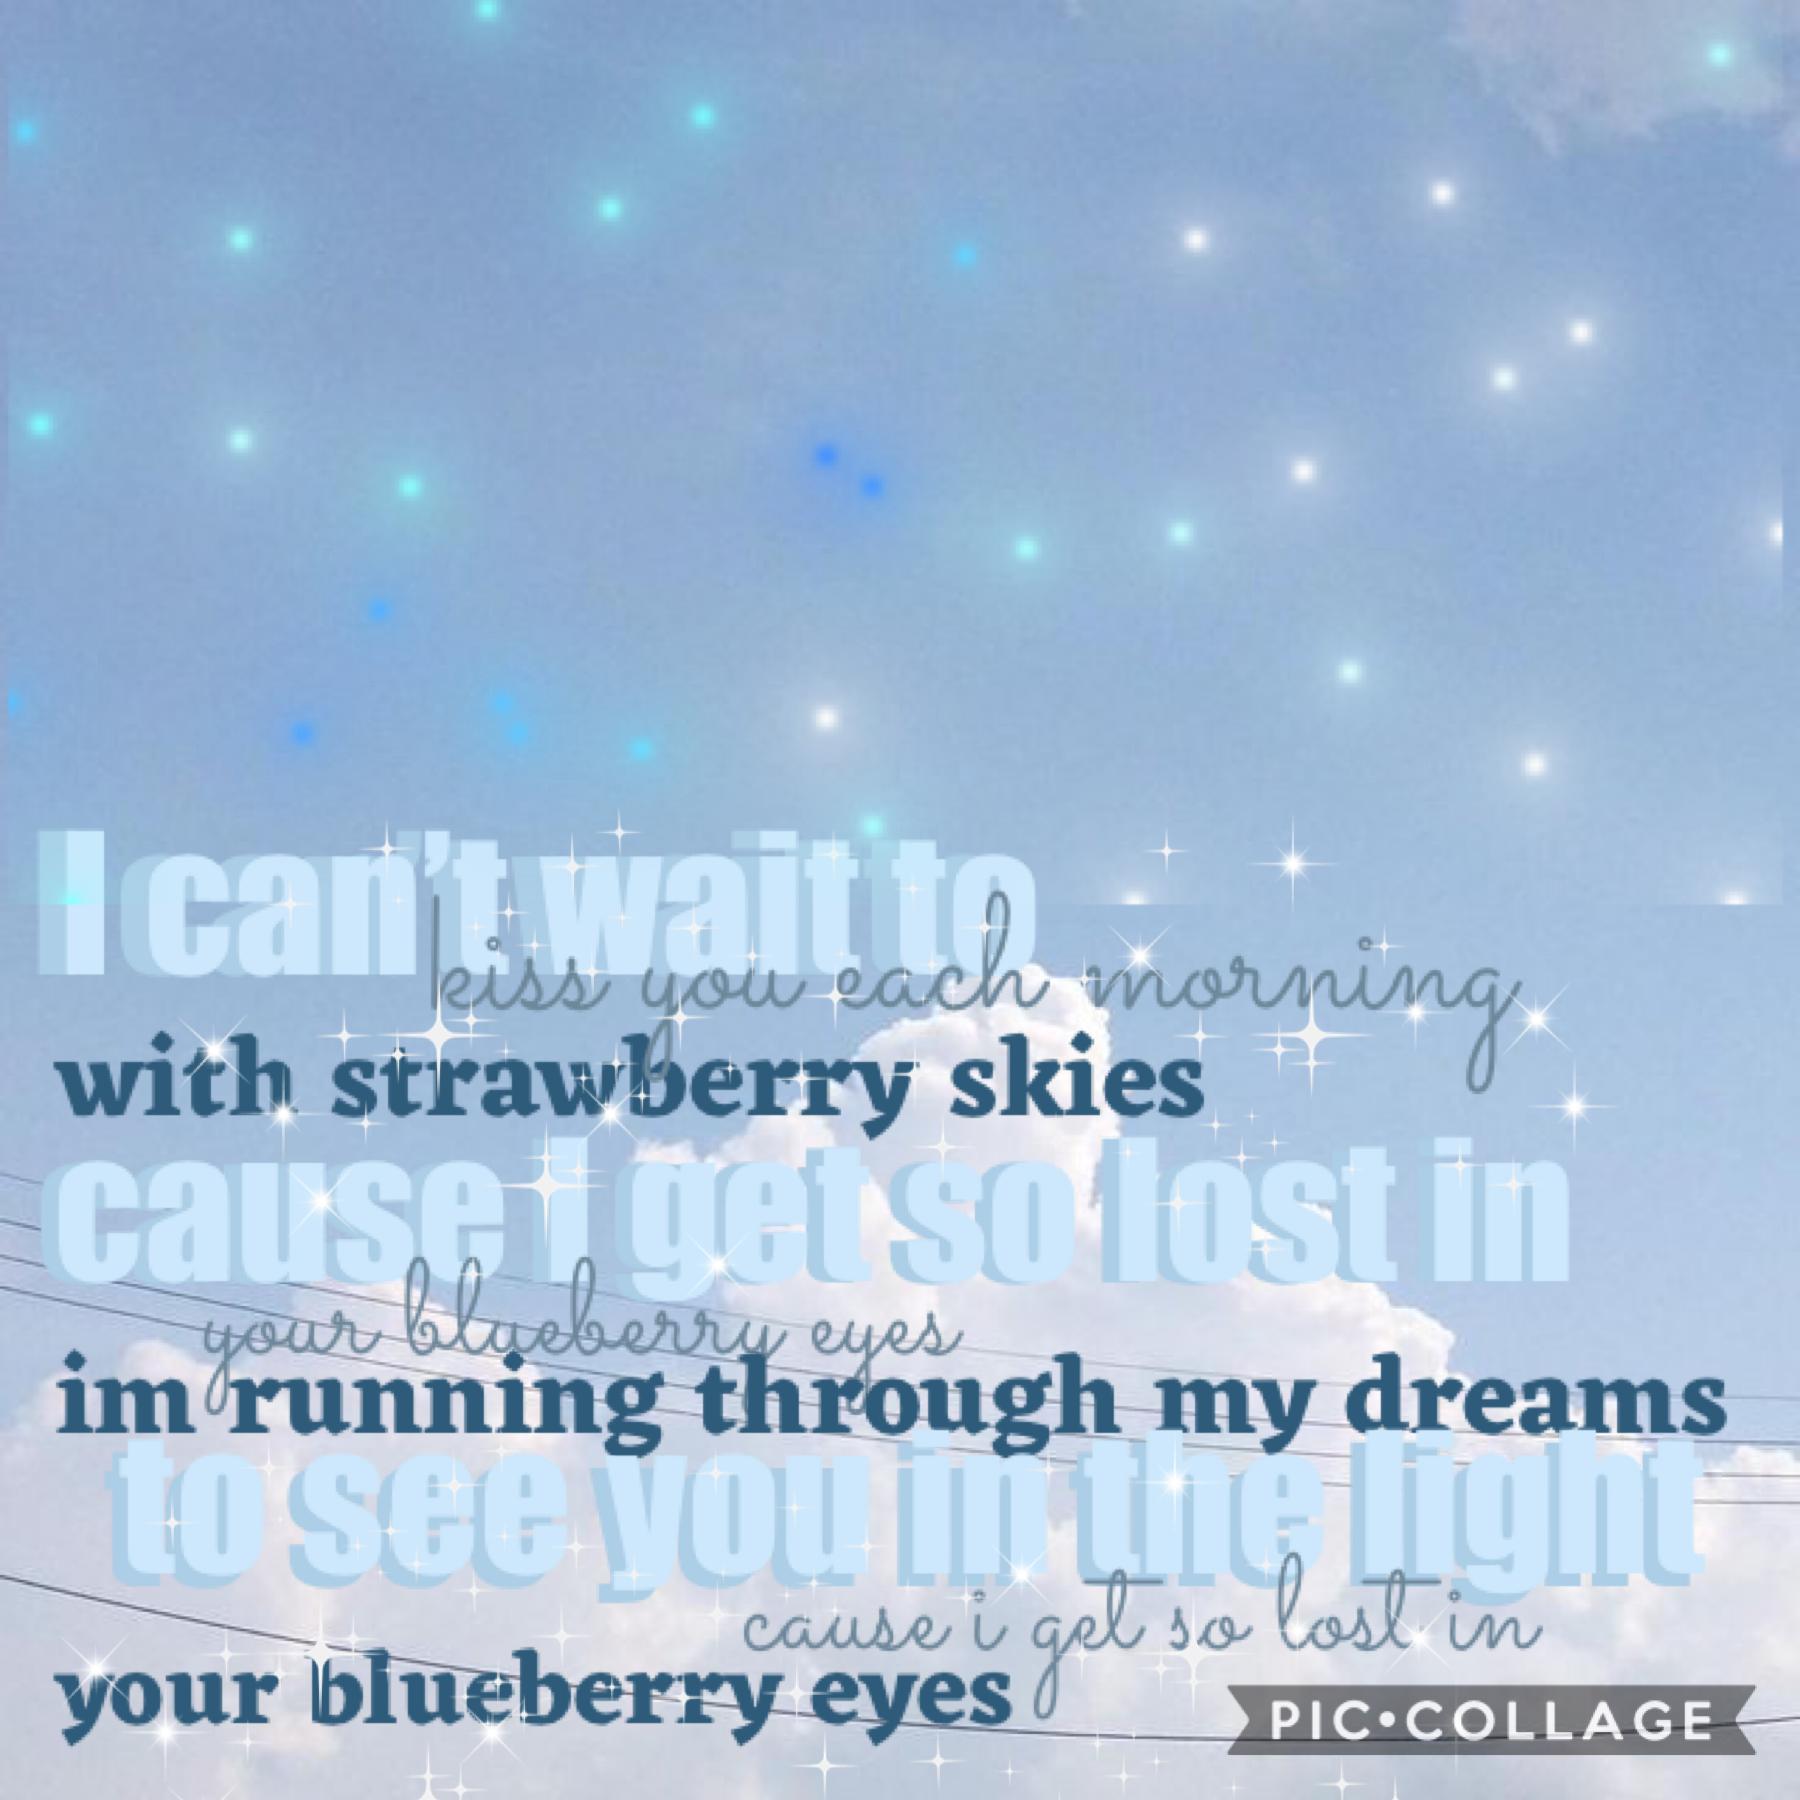 🧵tap💍
hey! I’m back! 
listen to “blueberry eyes” by MAX